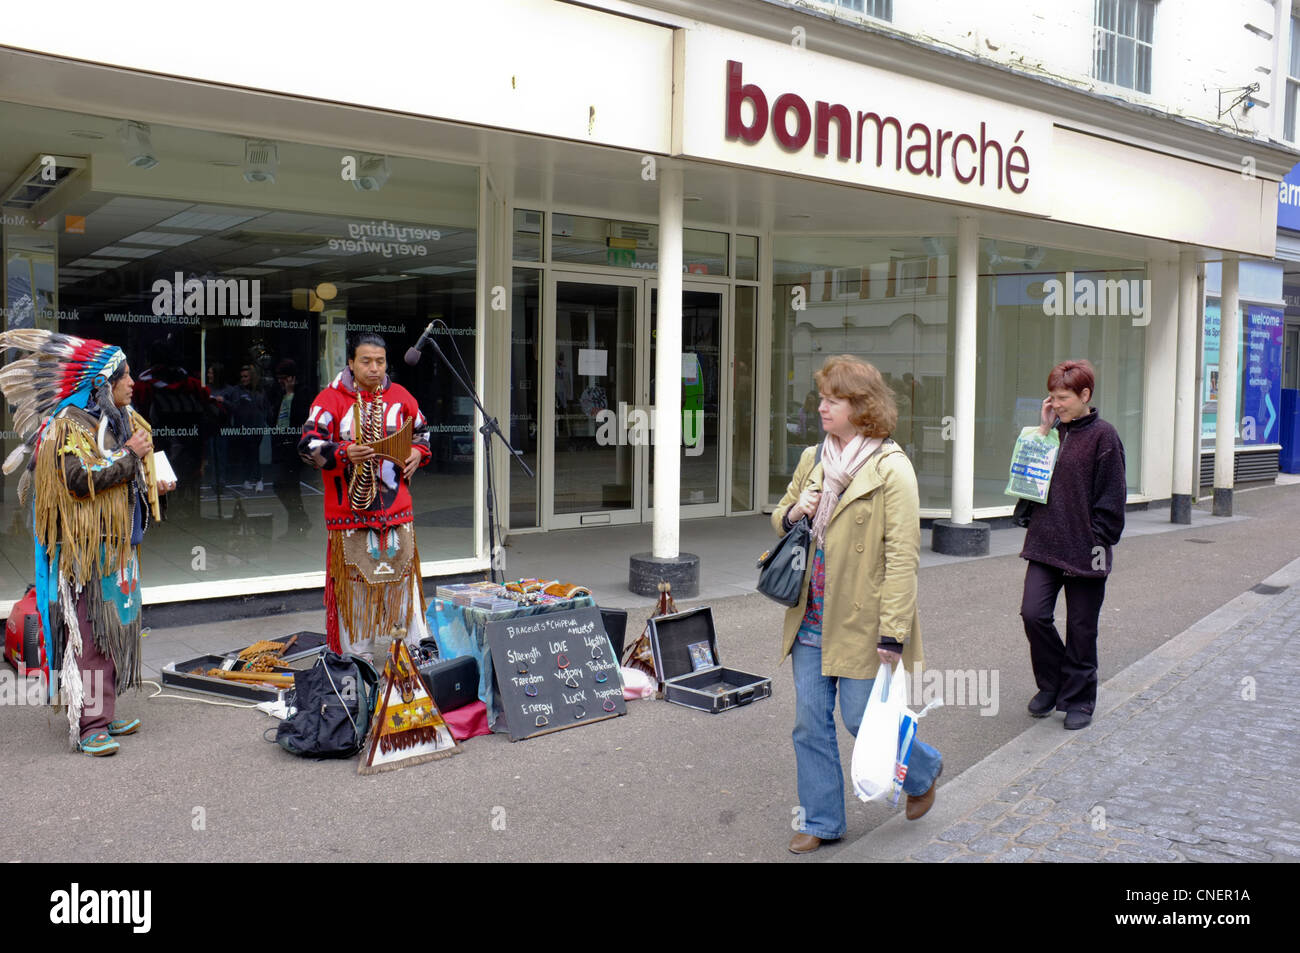 South American buskers and selling jewelry  busking outside a closed-down shop in Falmouth, Cornwall Stock Photo